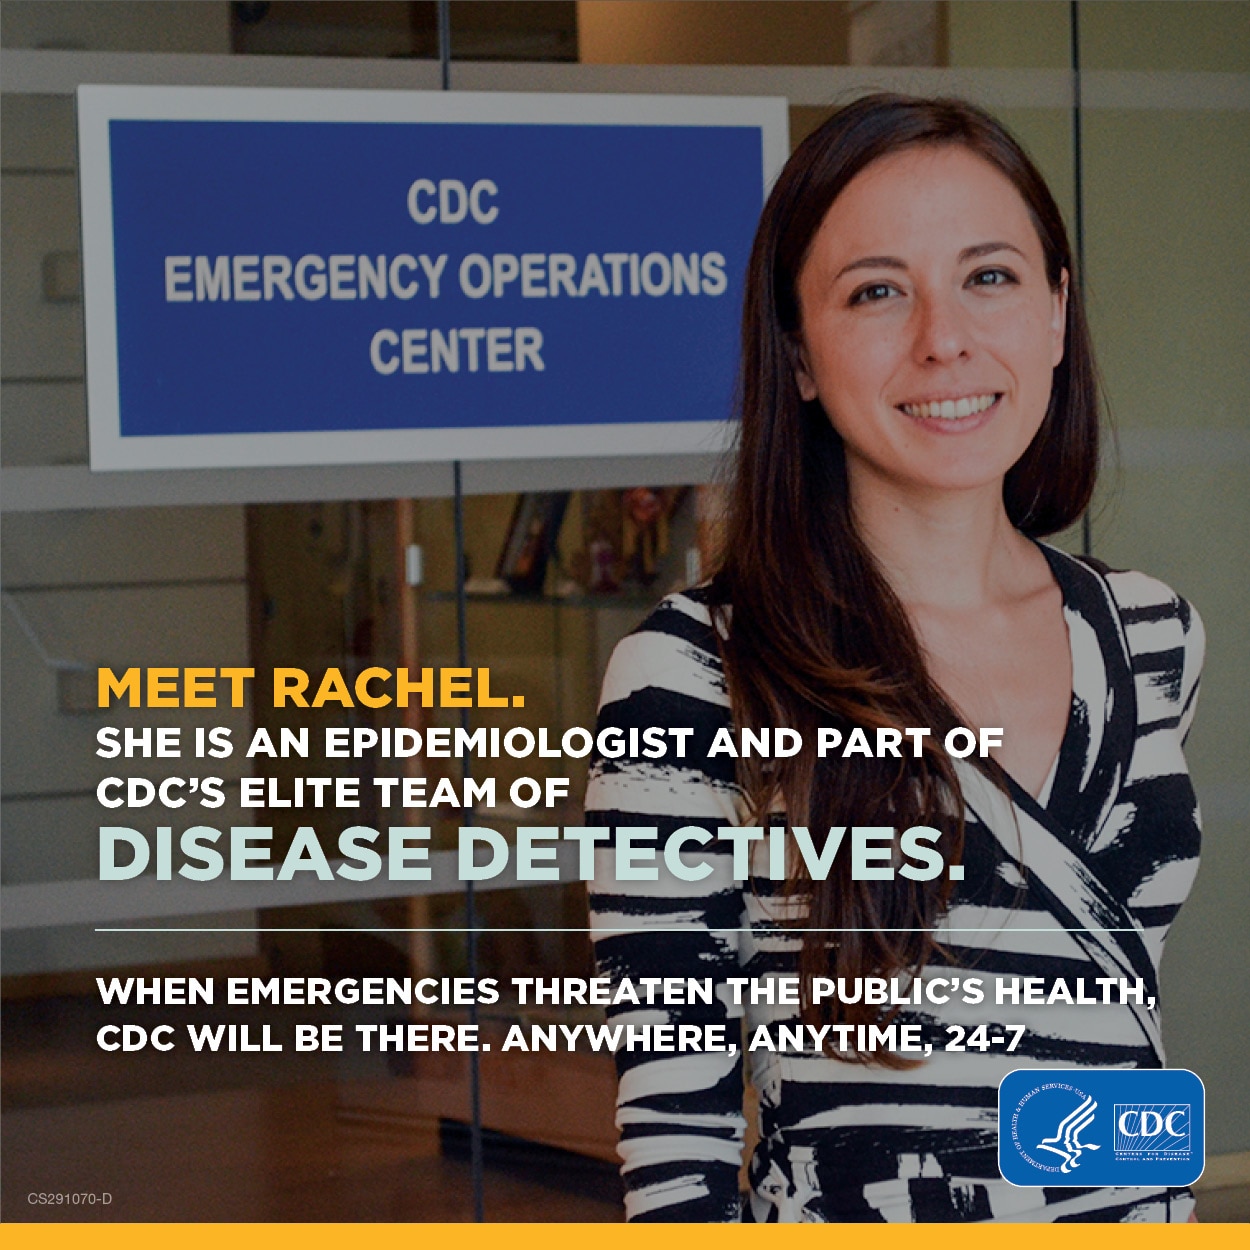 Meet Rachel.  She is an epidemiologist and part of CDC's elite team of disease detectives.